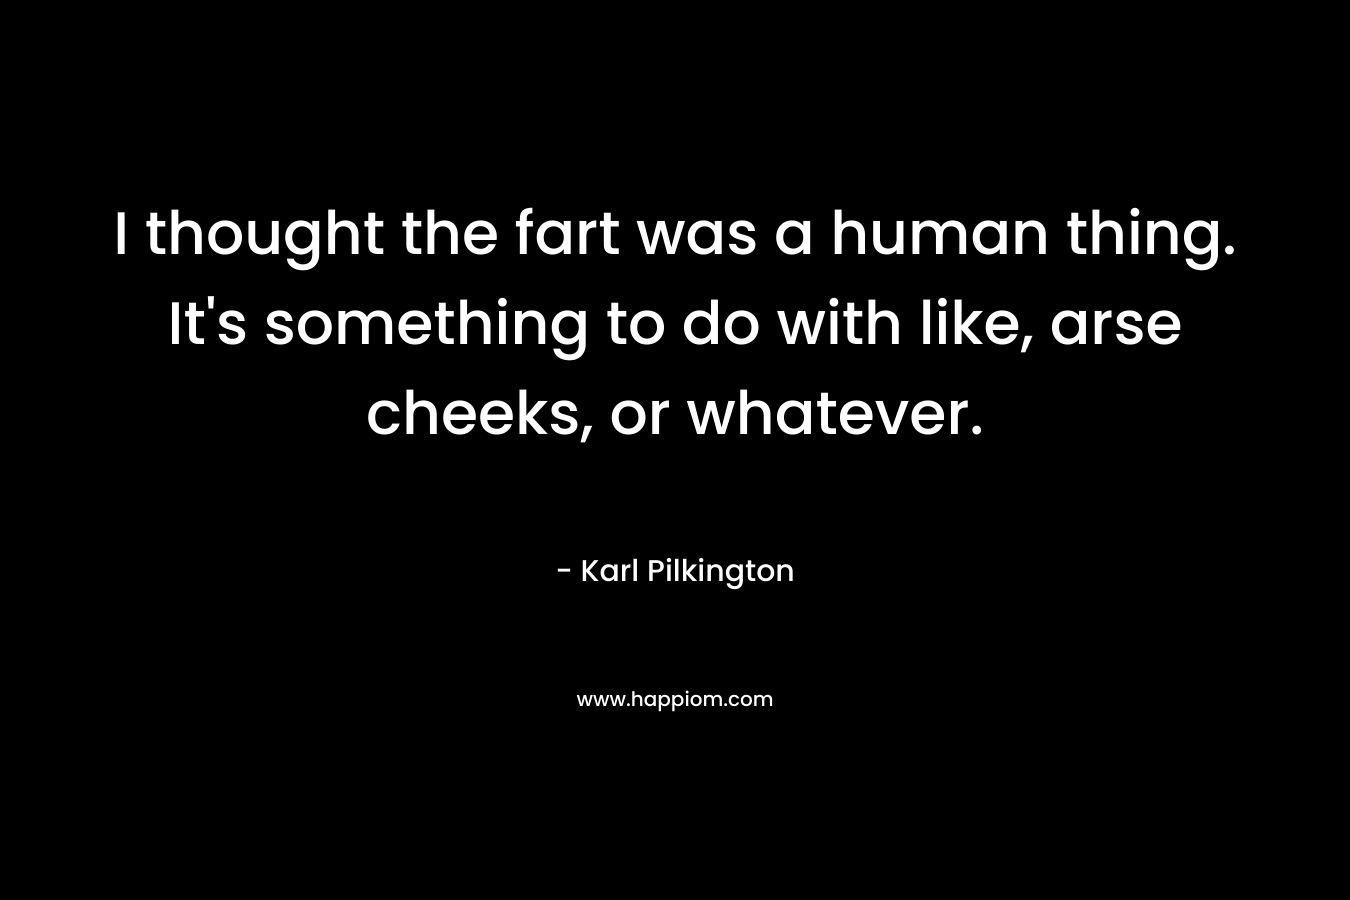 I thought the fart was a human thing. It’s something to do with like, arse cheeks, or whatever. – Karl Pilkington